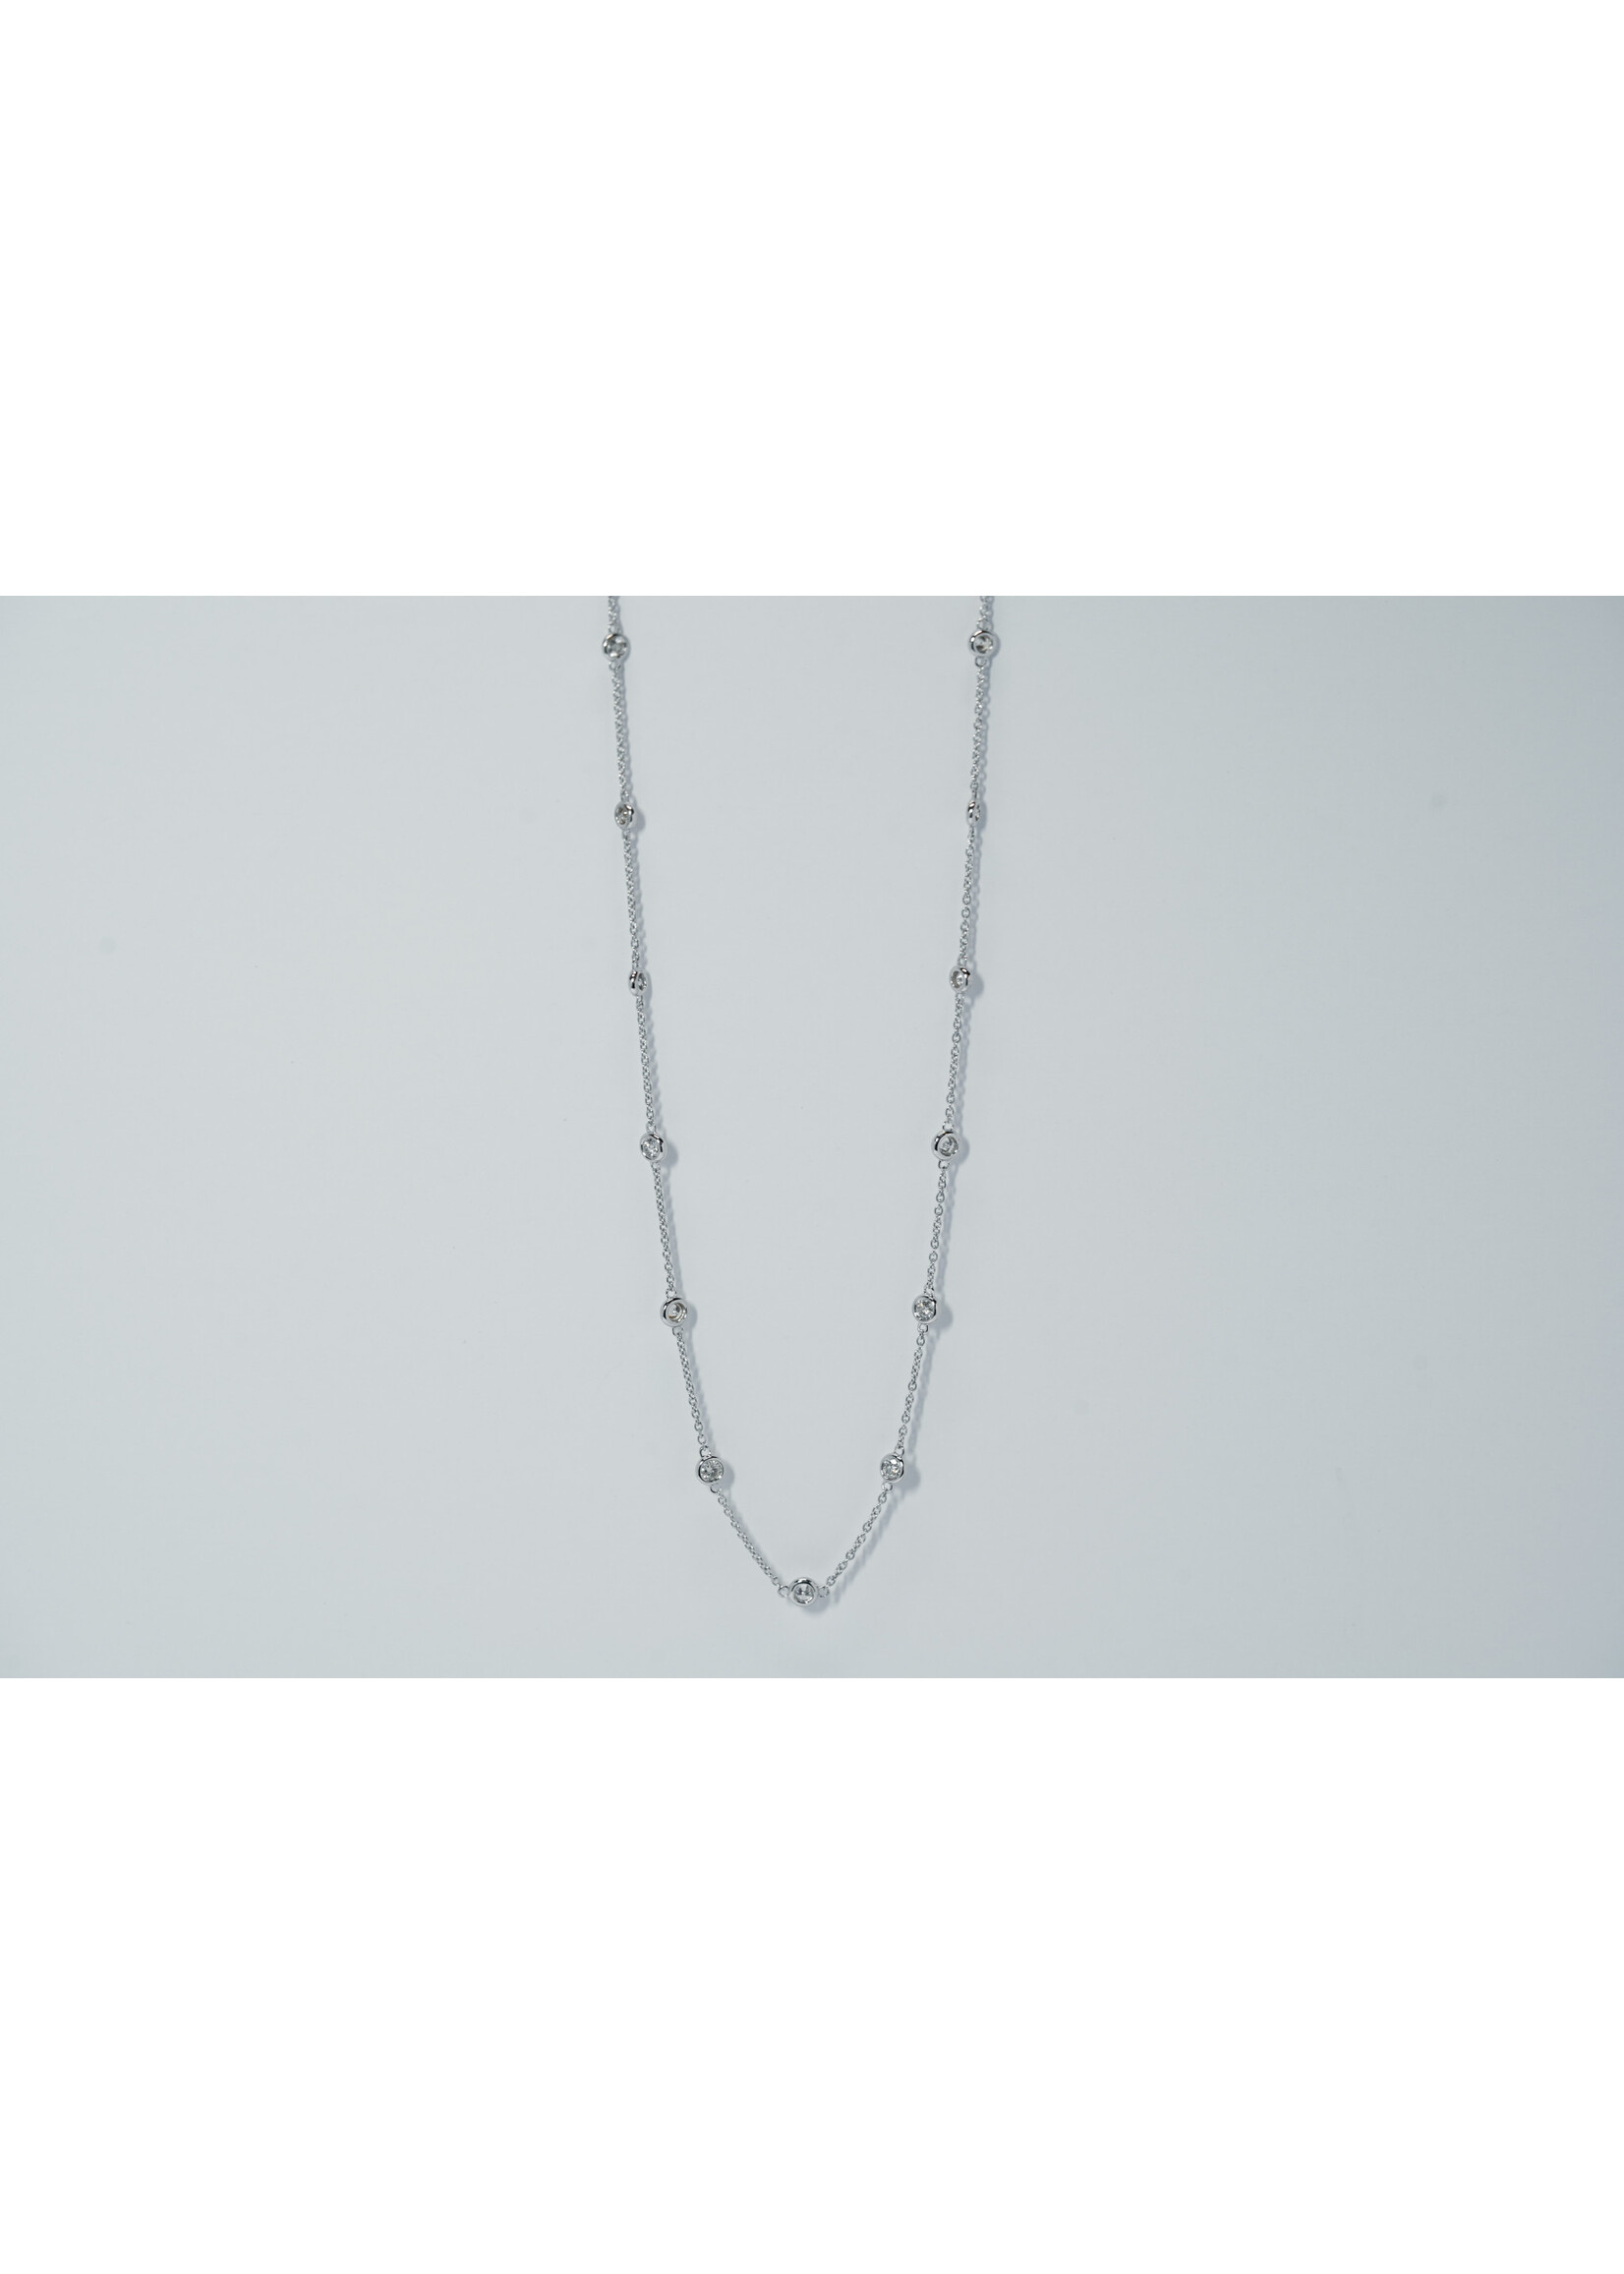 14KW 3.84g 1.04ctw Diamond By The Inch Necklace 16-18-20"